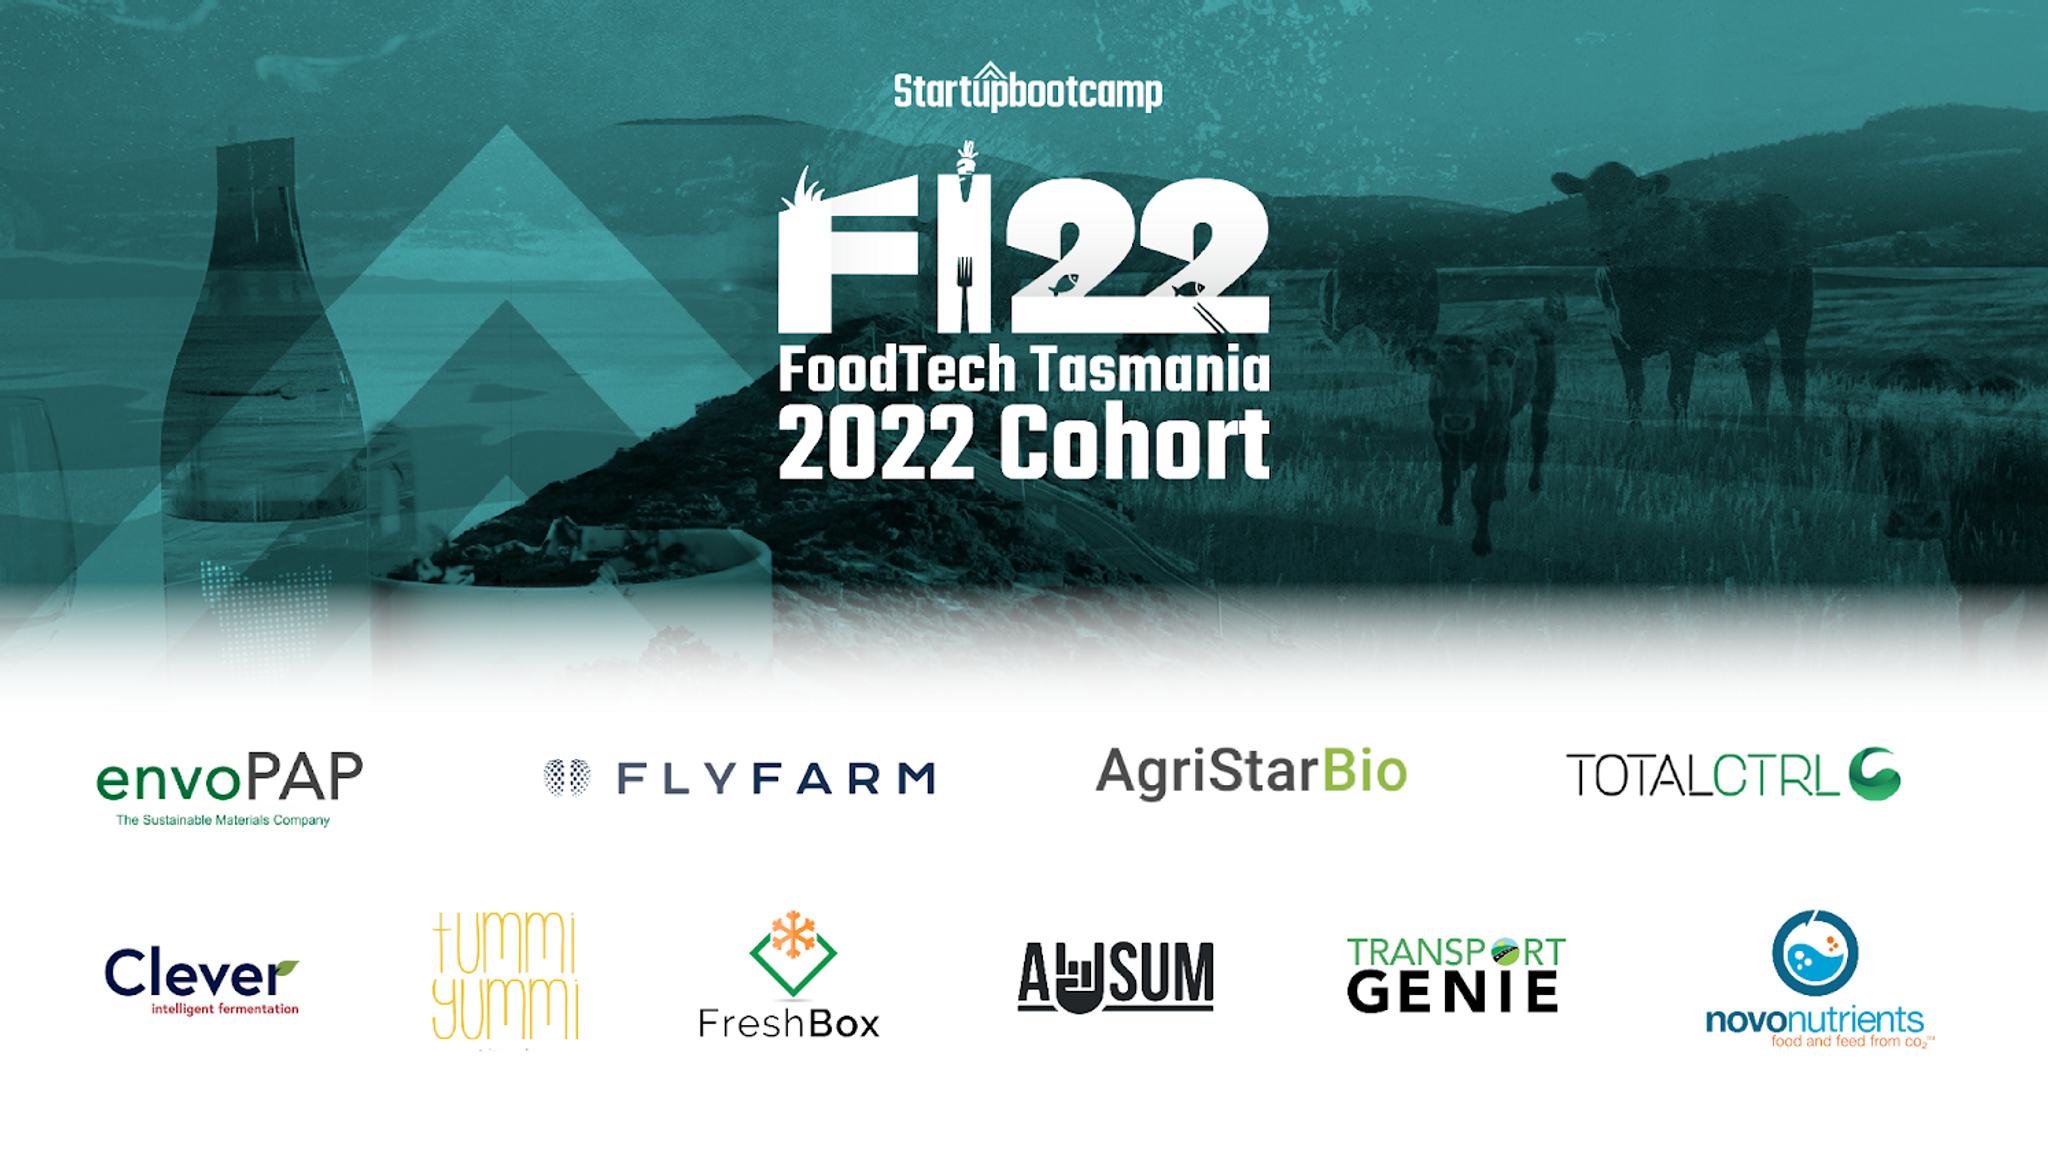 Ground-Breaking Food and AgriTech startups coming to Tasmania